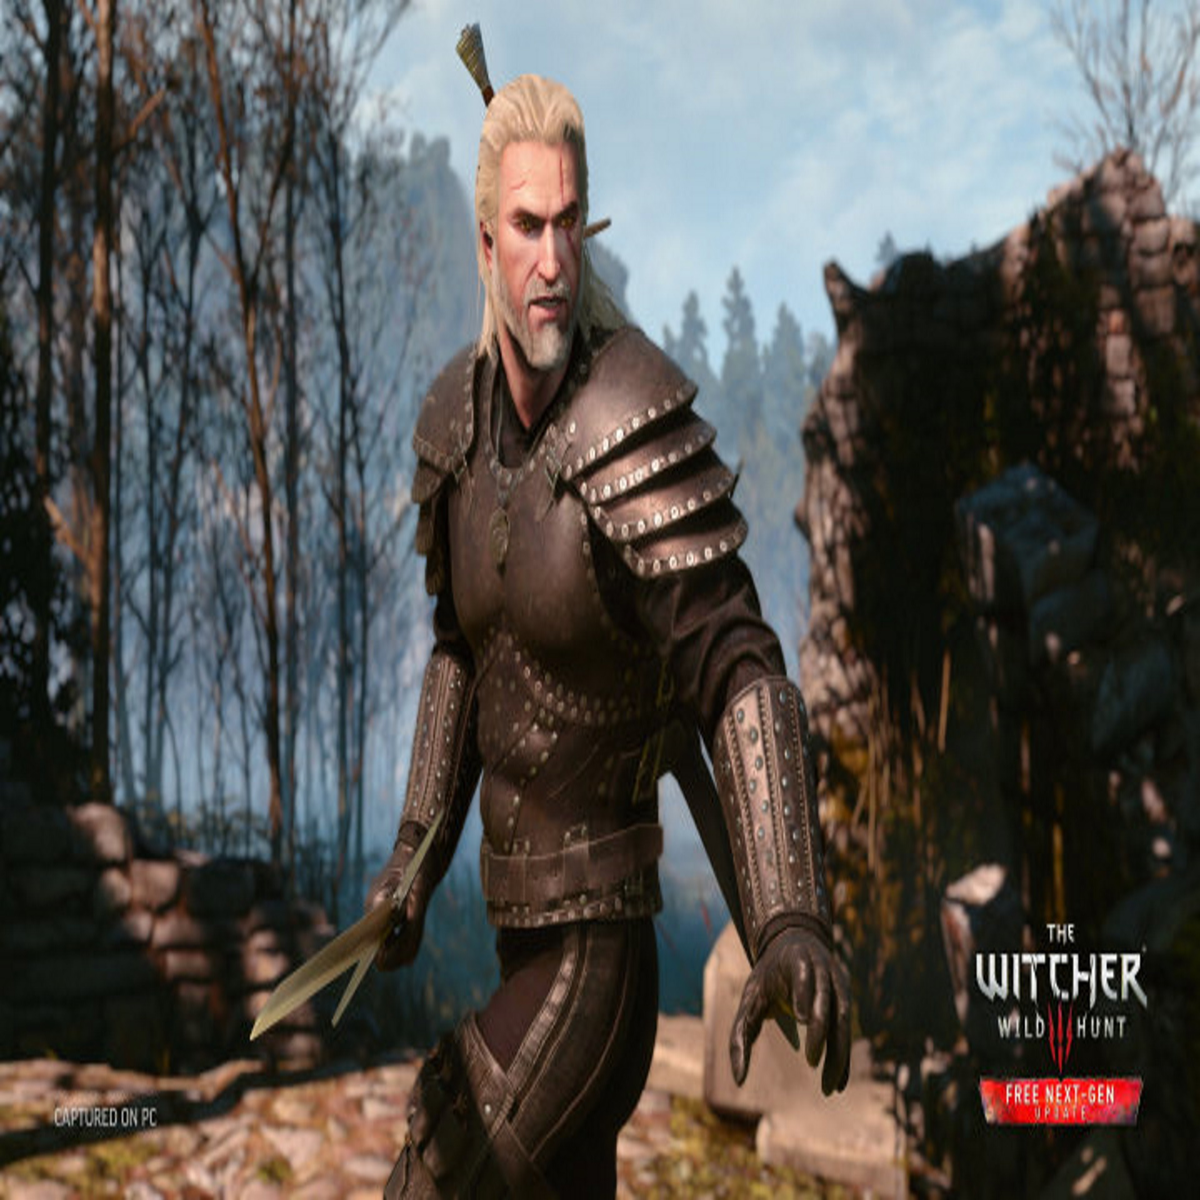 Home of The Witcher games